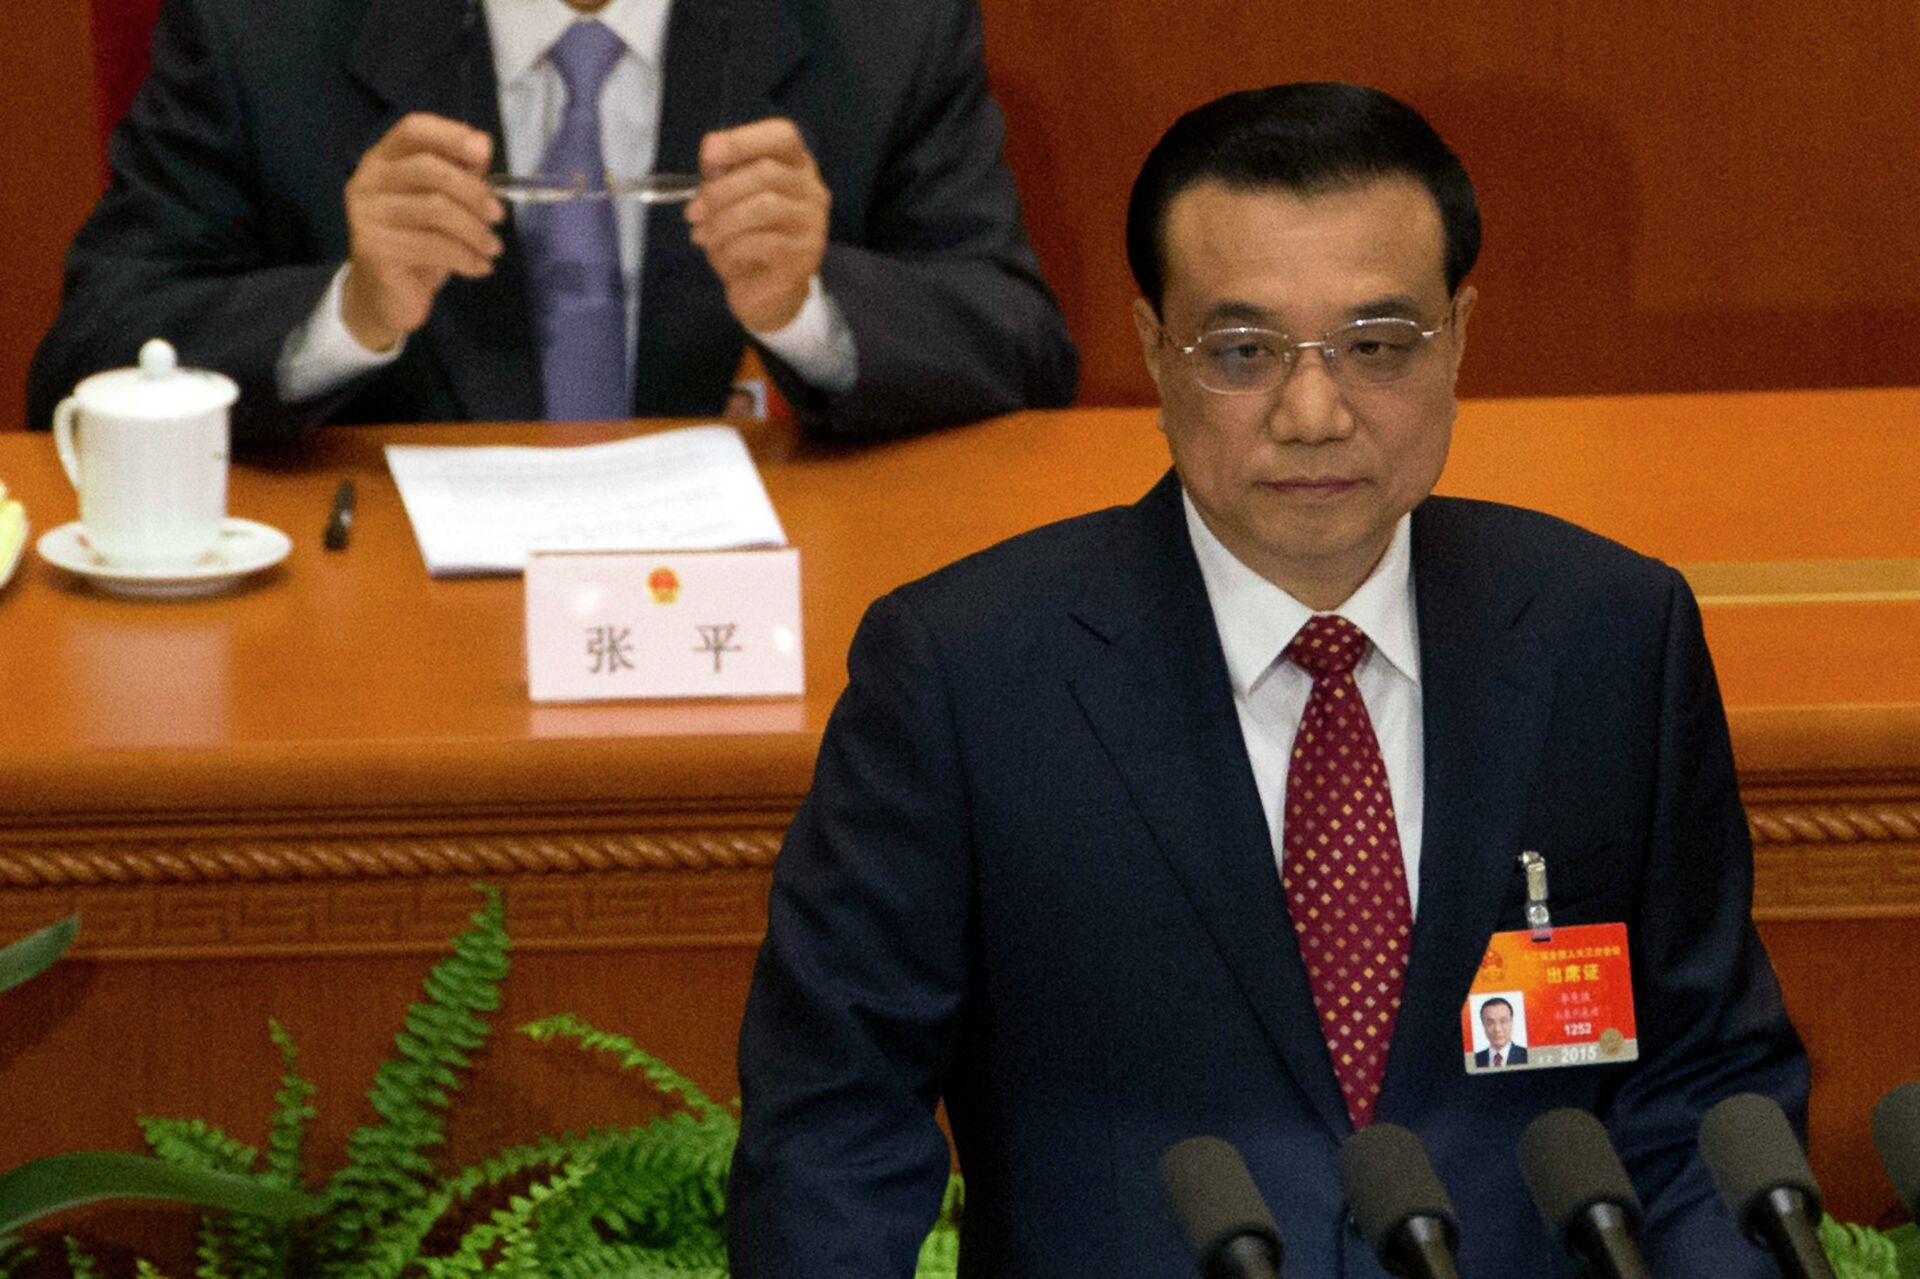 Chinese Premier Li Keqiang delivers the work report during the opening session of the National People's Congress at the Great Hall of the People in Beijing, Thursday, March 5, 2015 - Sputnik International, 1920, 27.10.2023